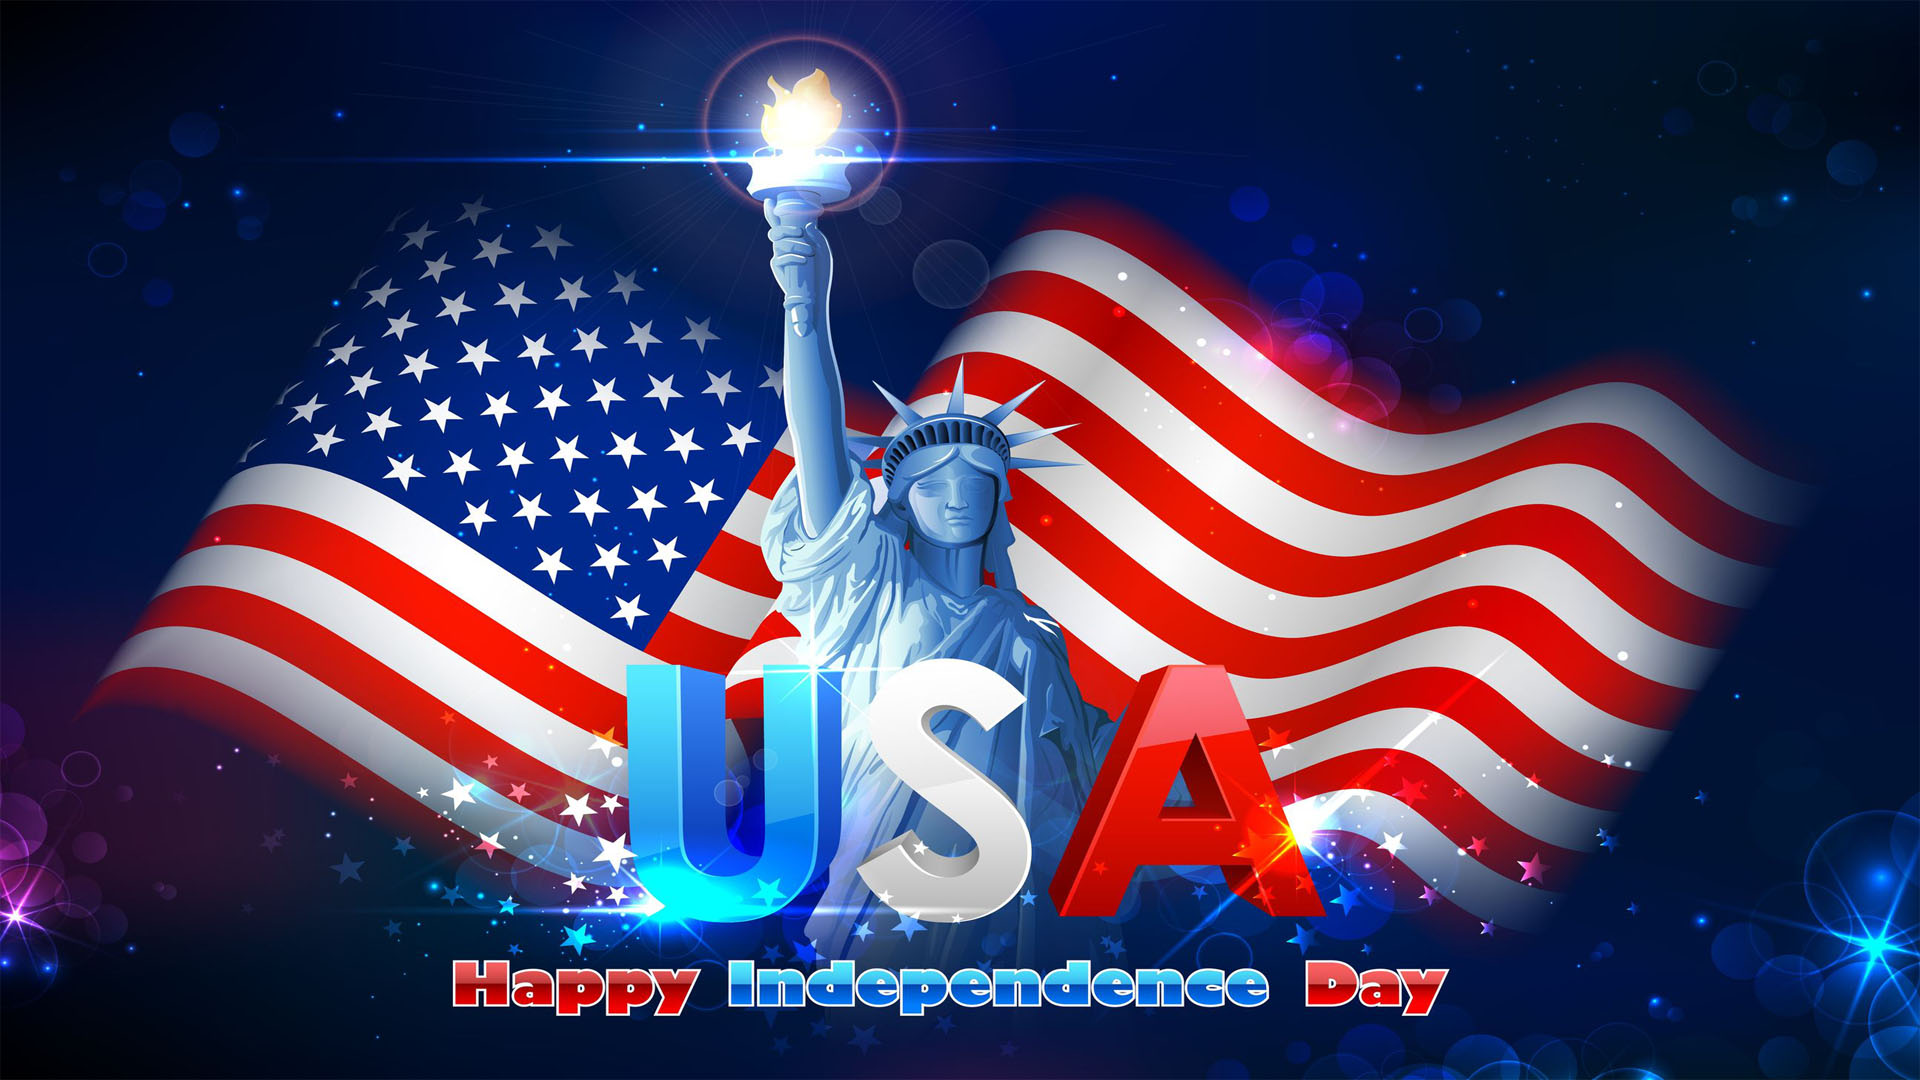 July 4th Happy Independence Day Wallpaper Desktop Home